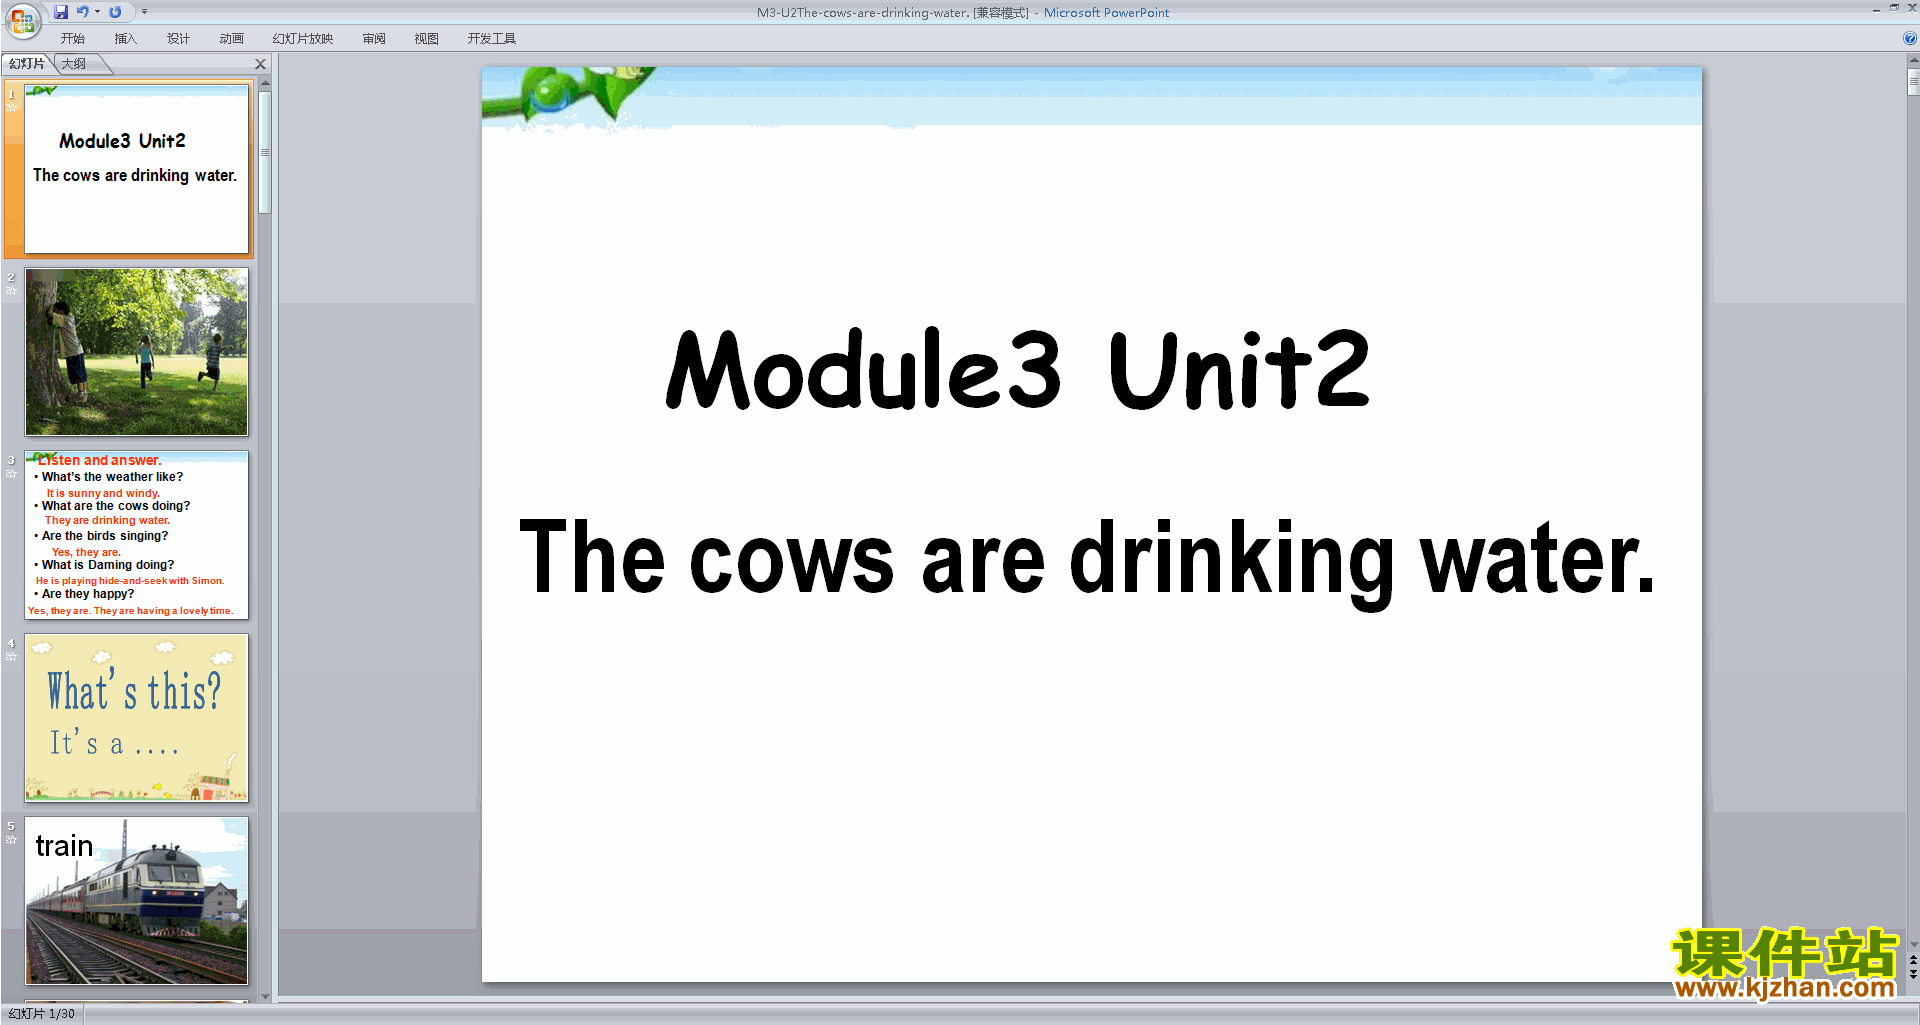 Ӣ﹫Unit2 The cows are drinking waterpptμ